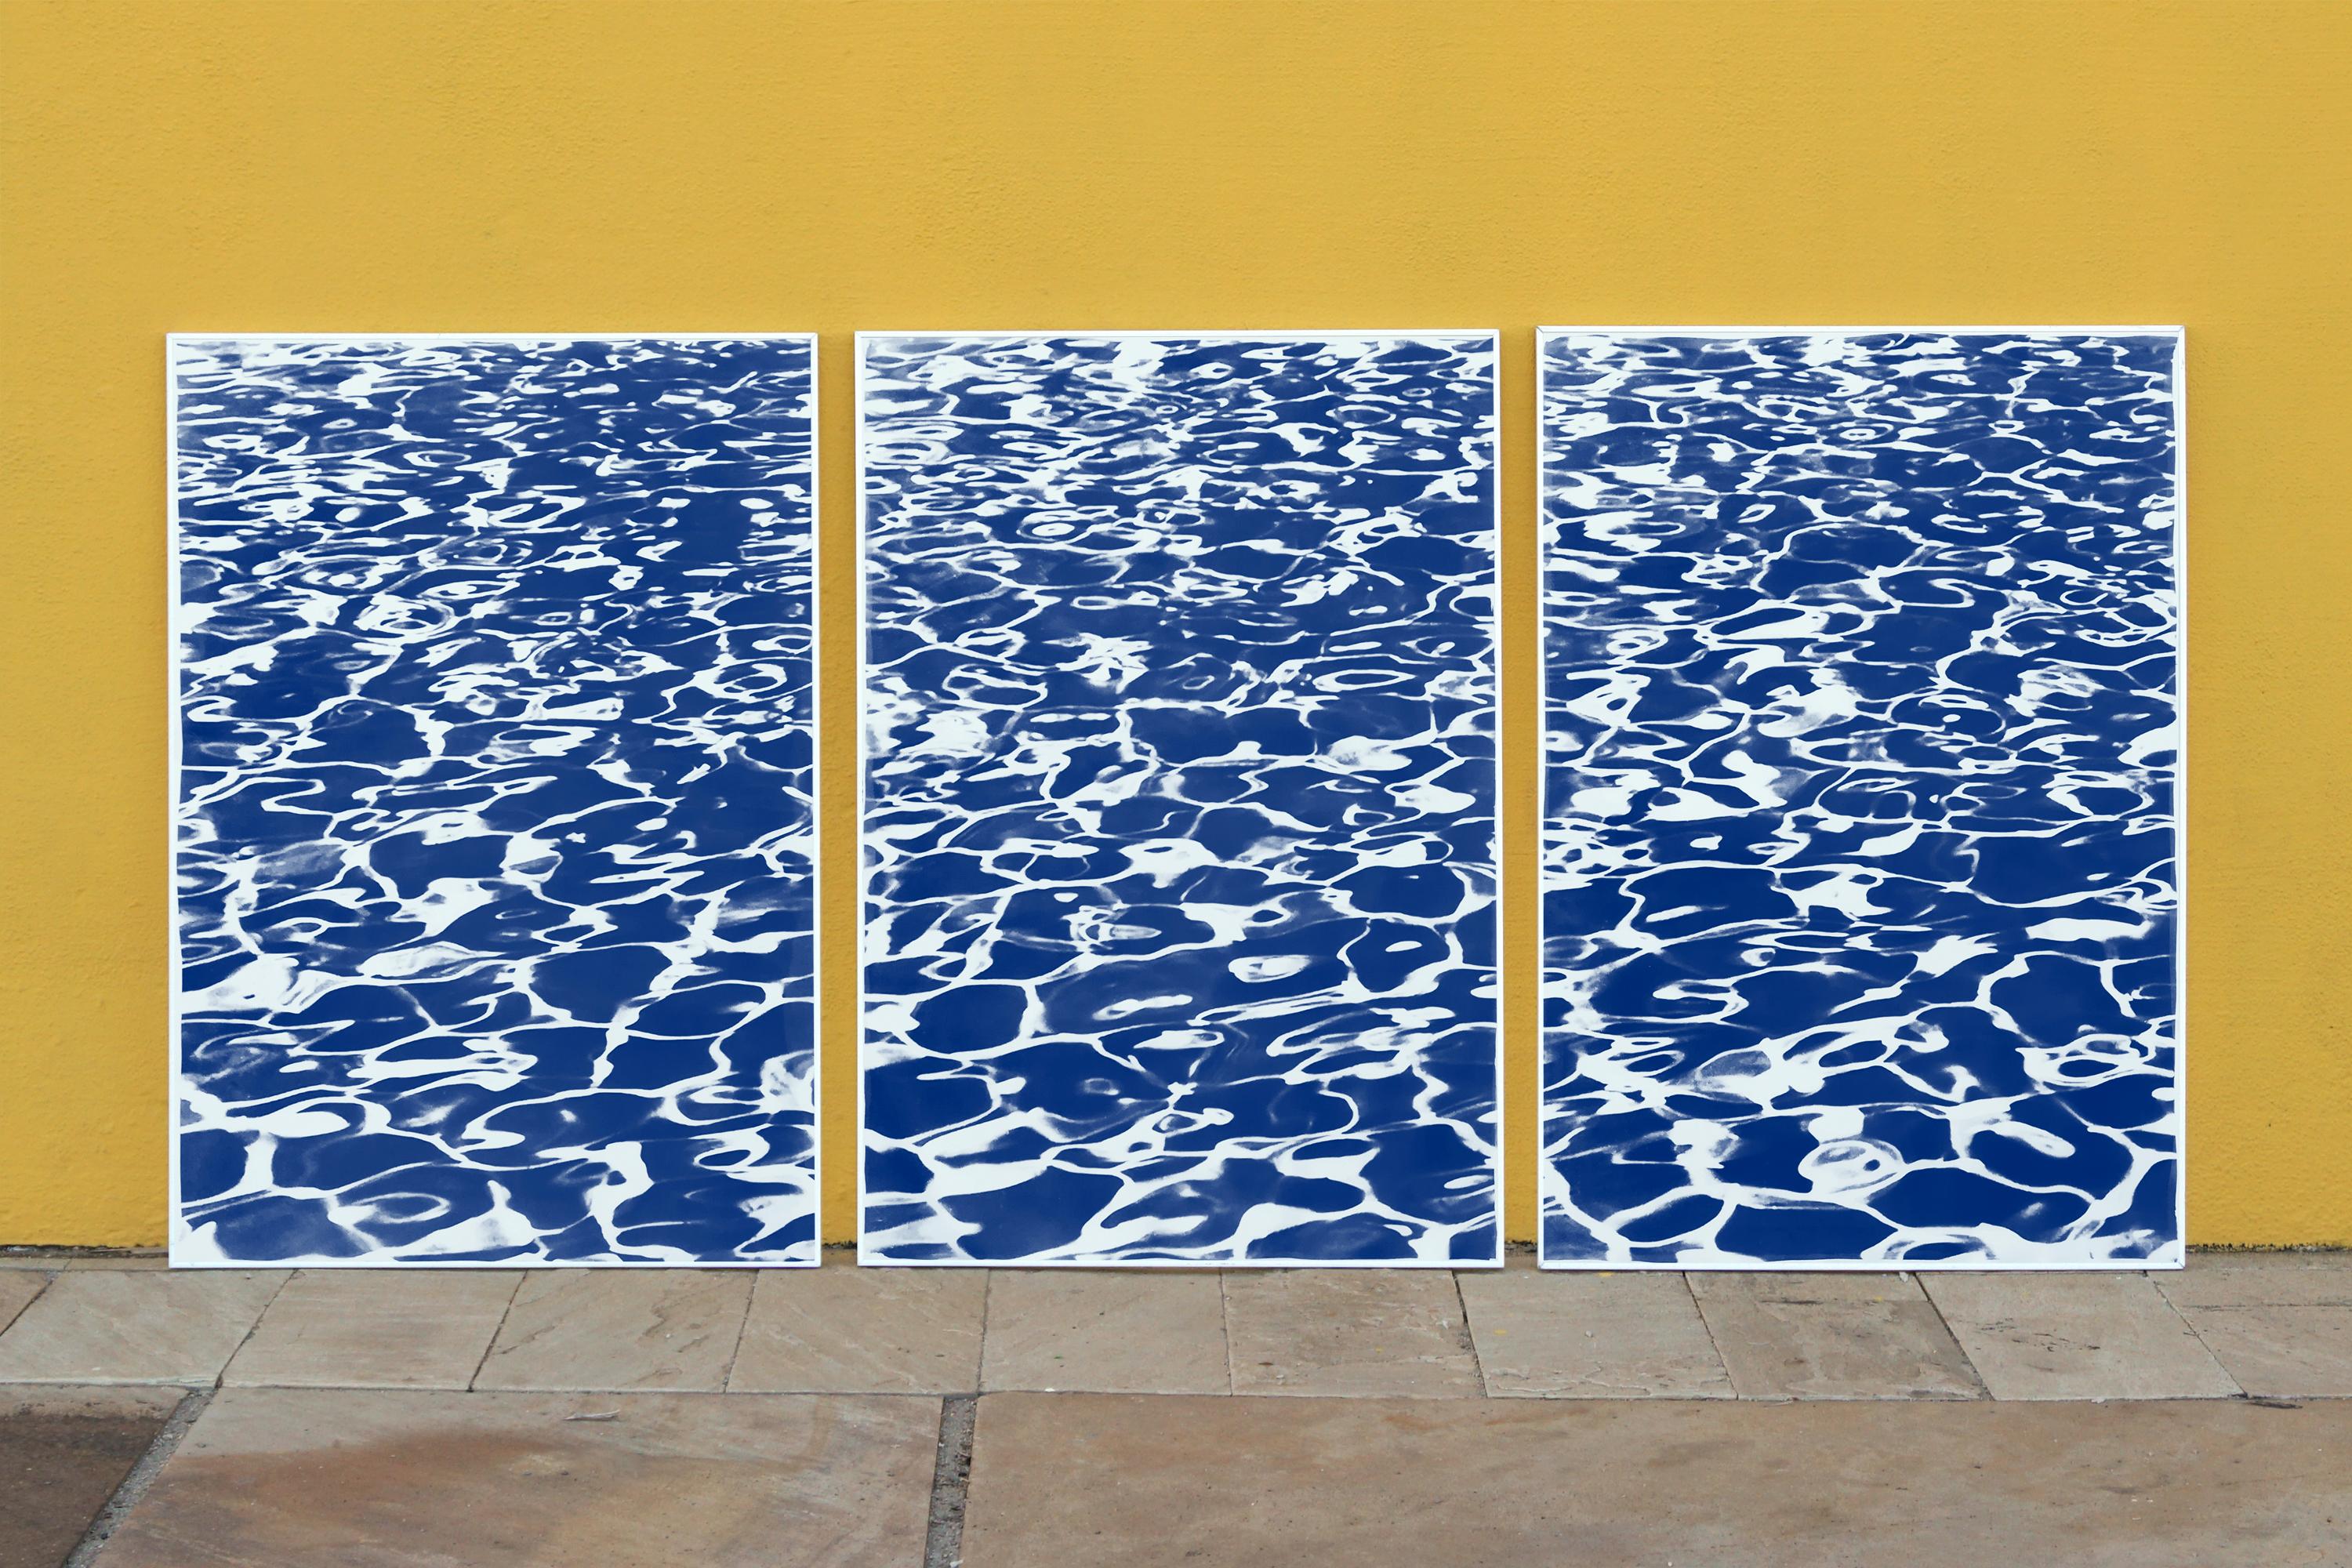 Pool Patterns, Nautical Abstract Seascape Triptych, Blue Cyanotype Print - Photograph by Kind of Cyan